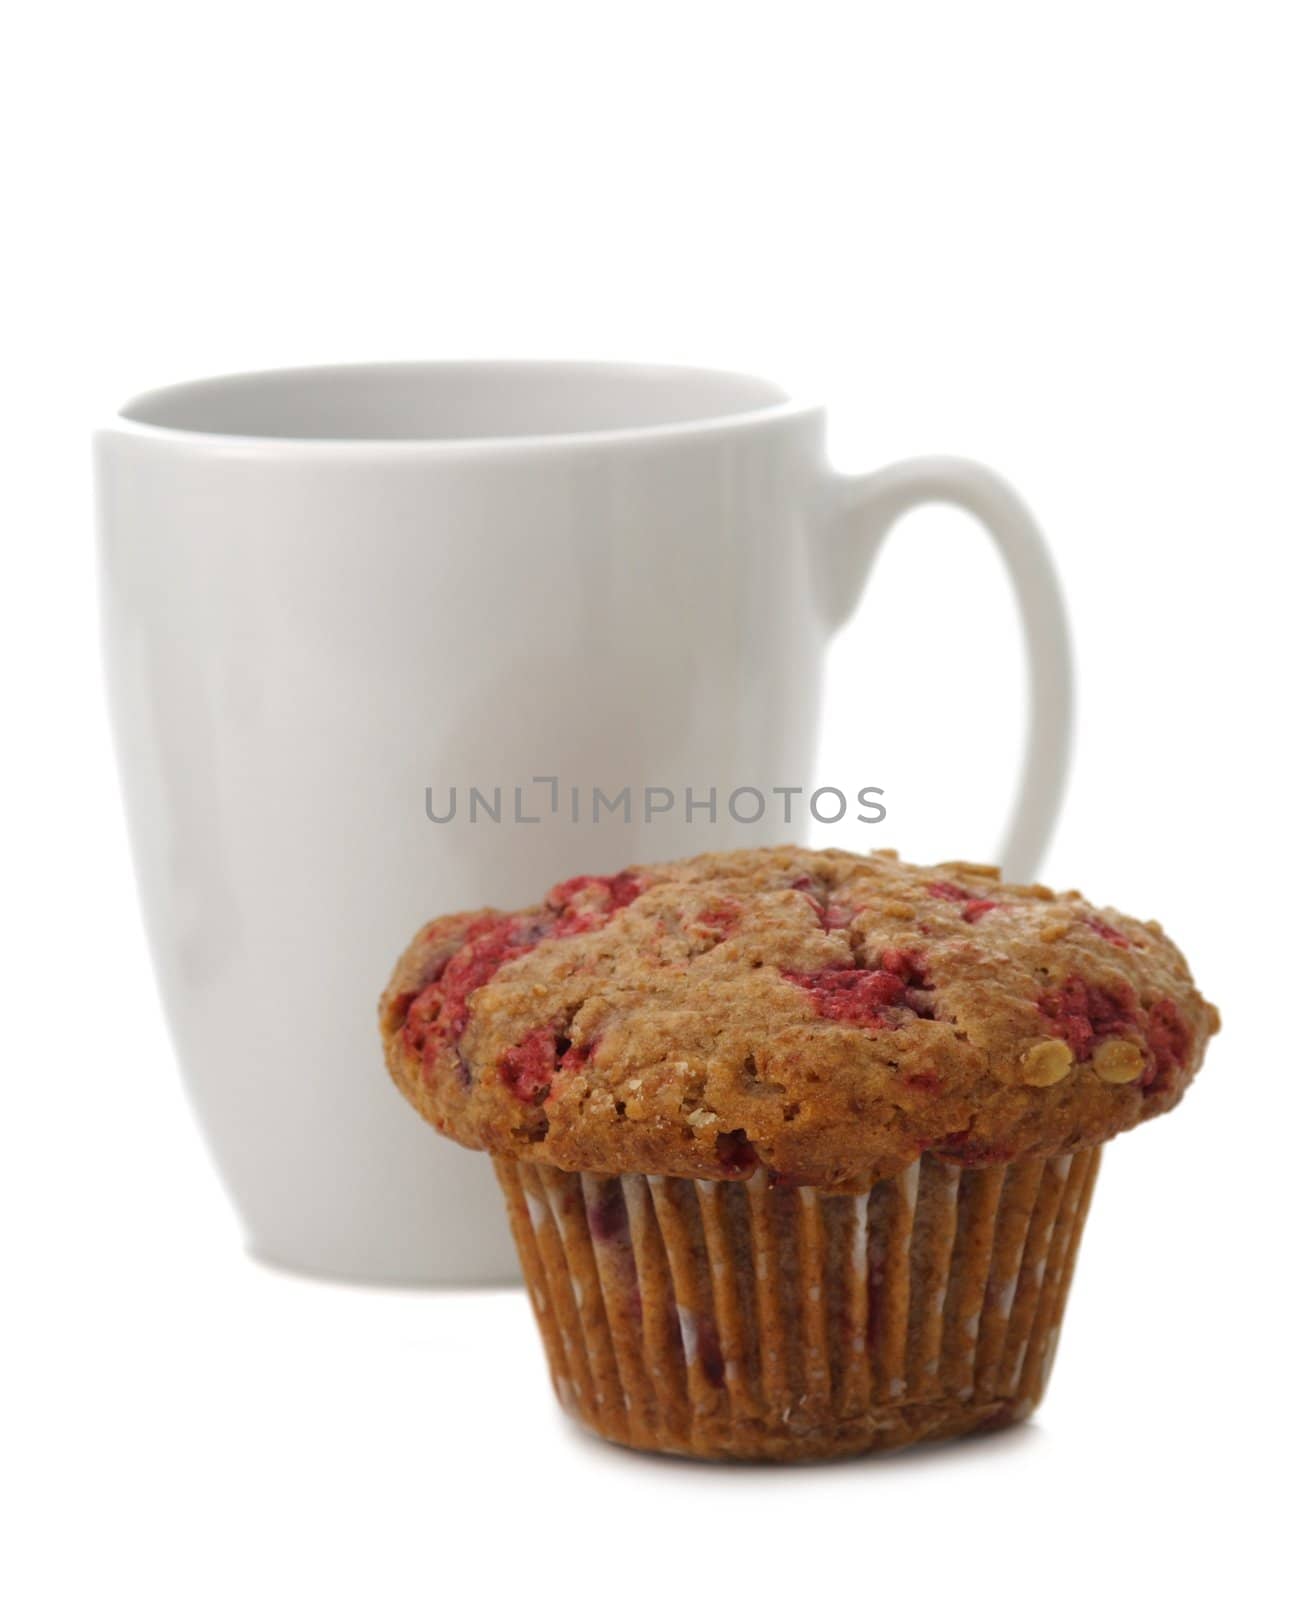 muffin and mug, white background by lanalanglois